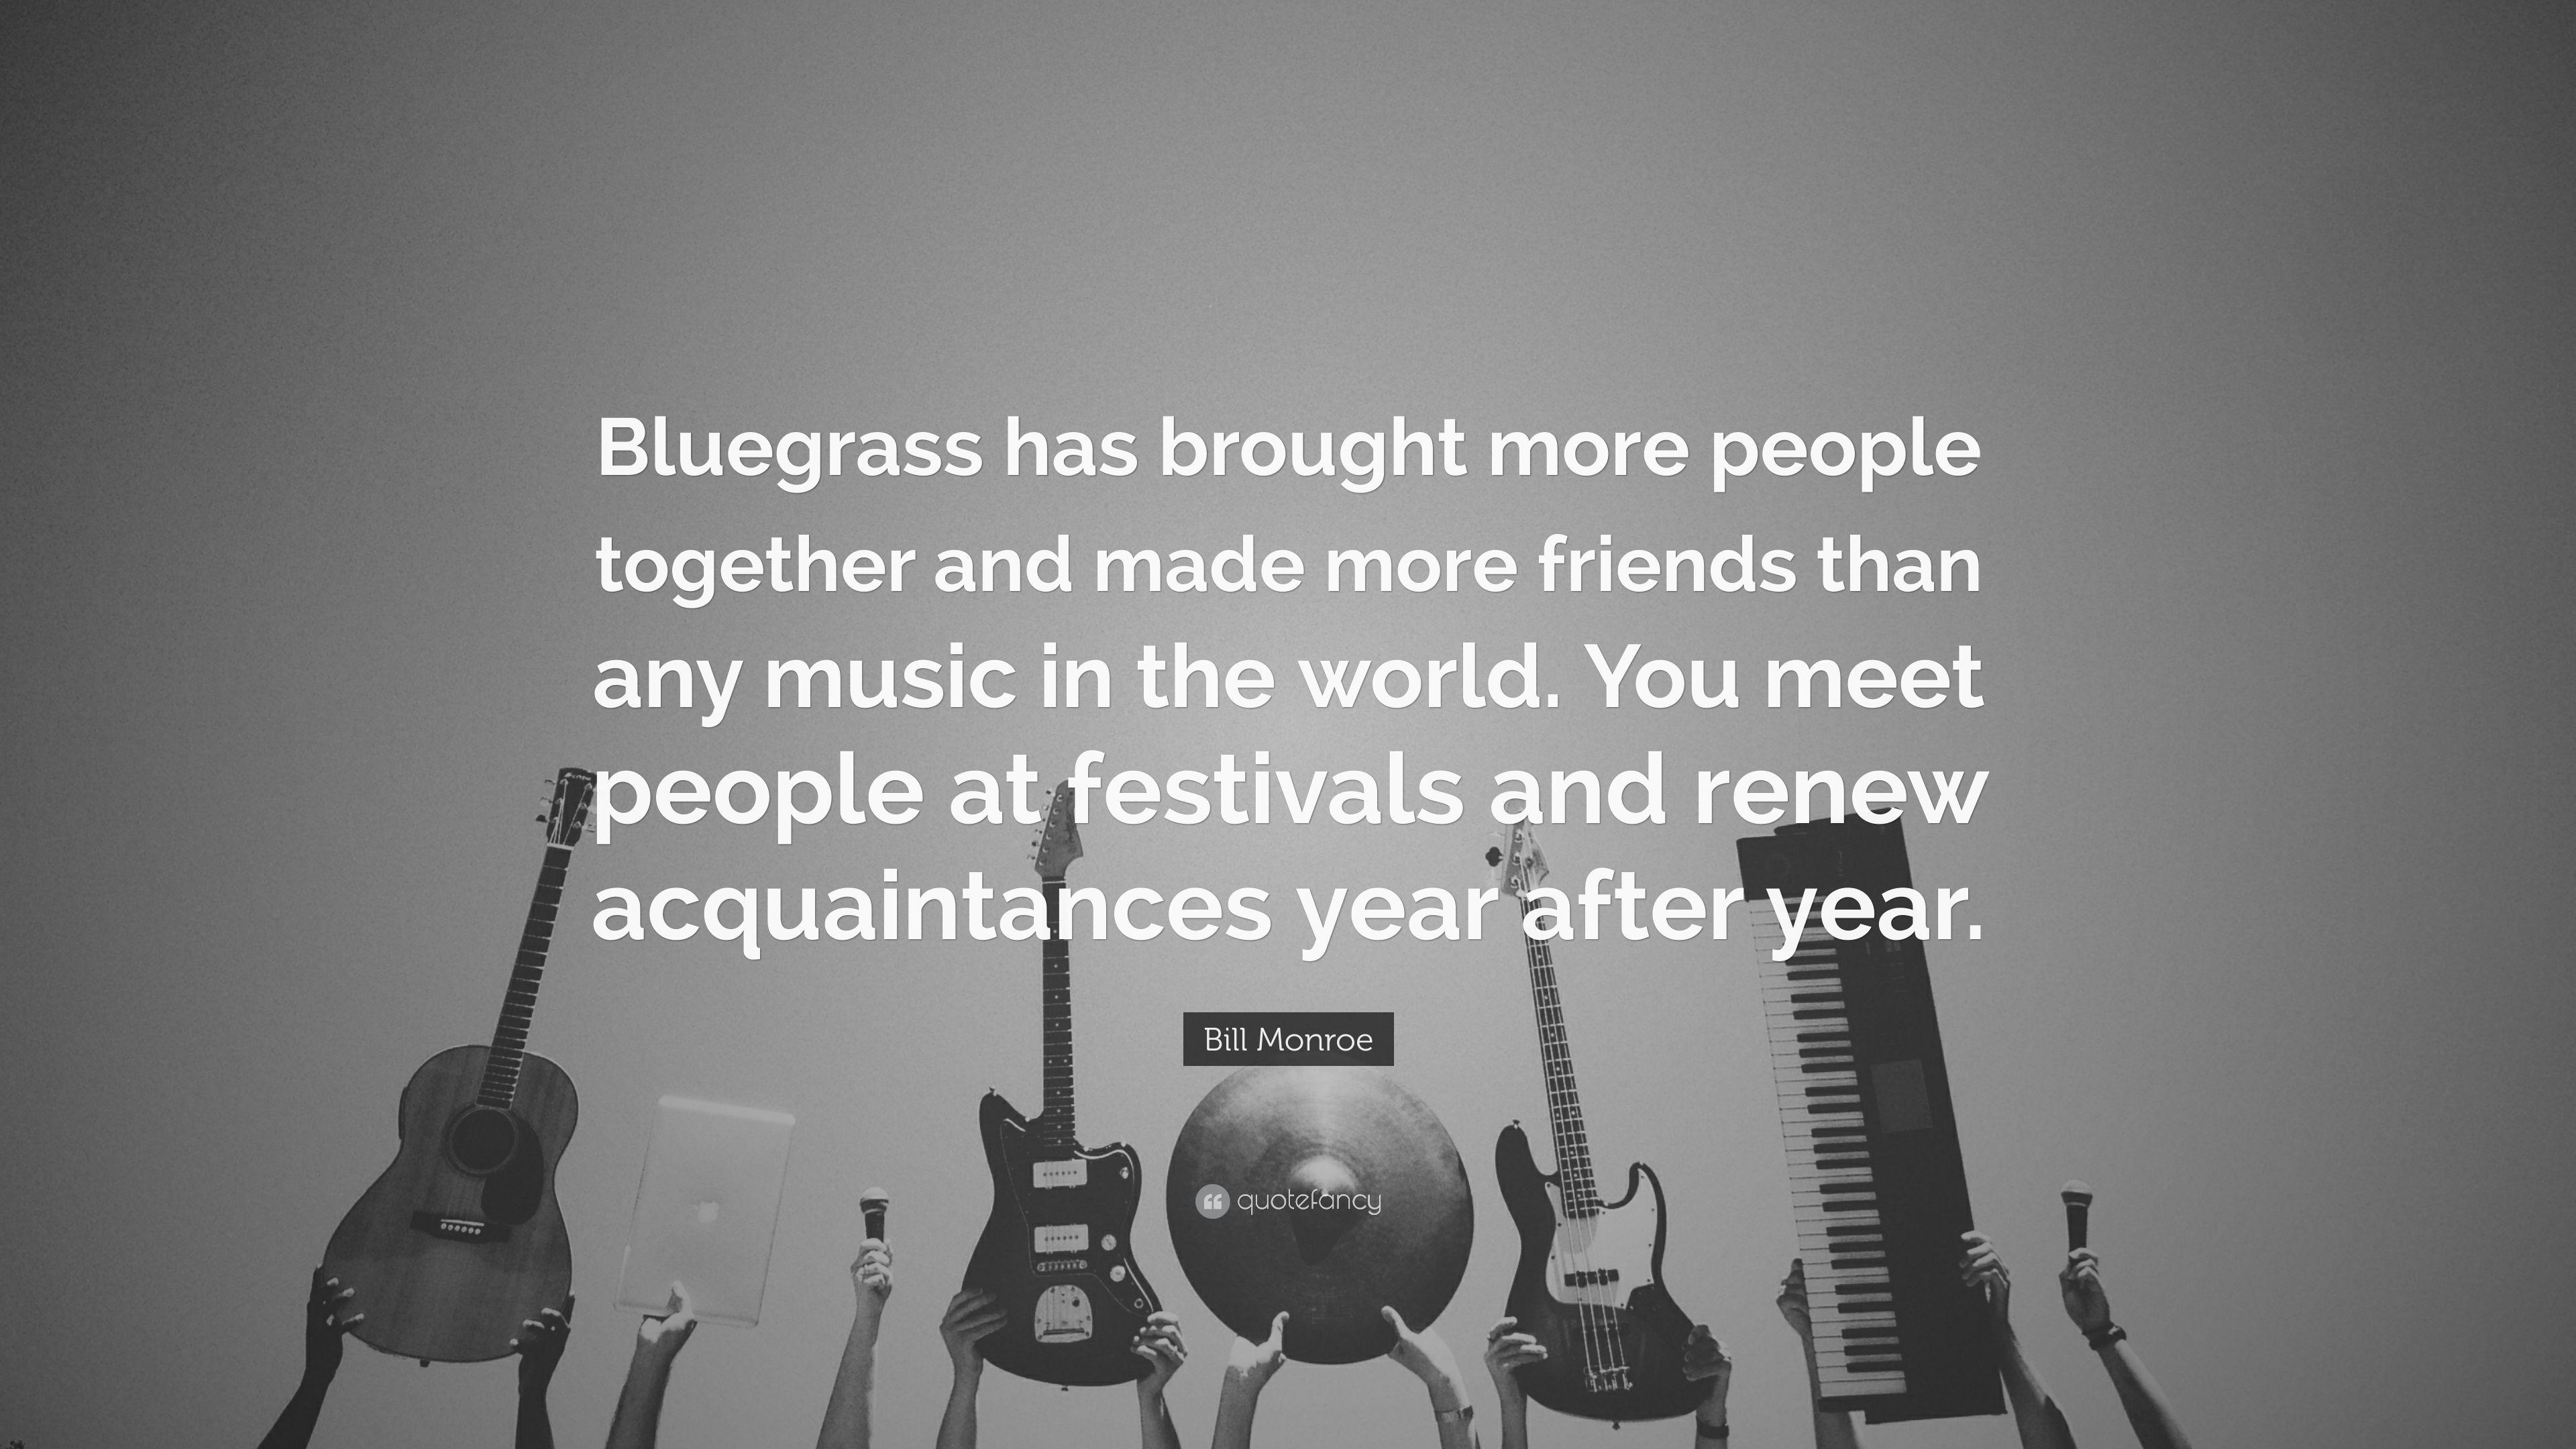 Bill Monroe Quote: “Bluegrass has brought more people together